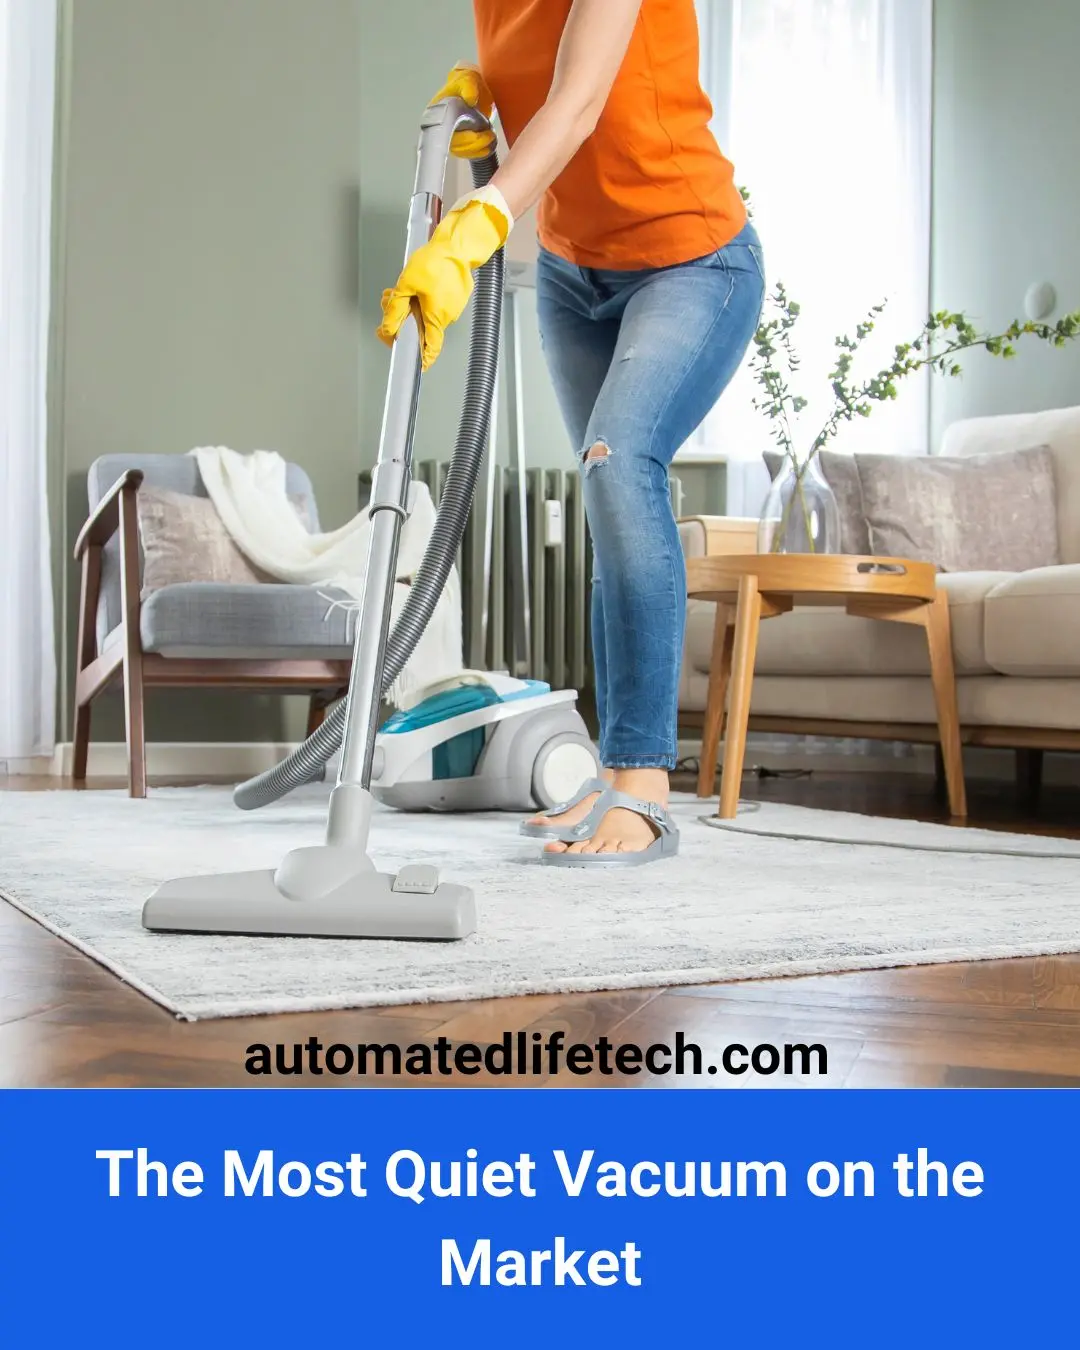 The Most Quiet Vacuum on the Market